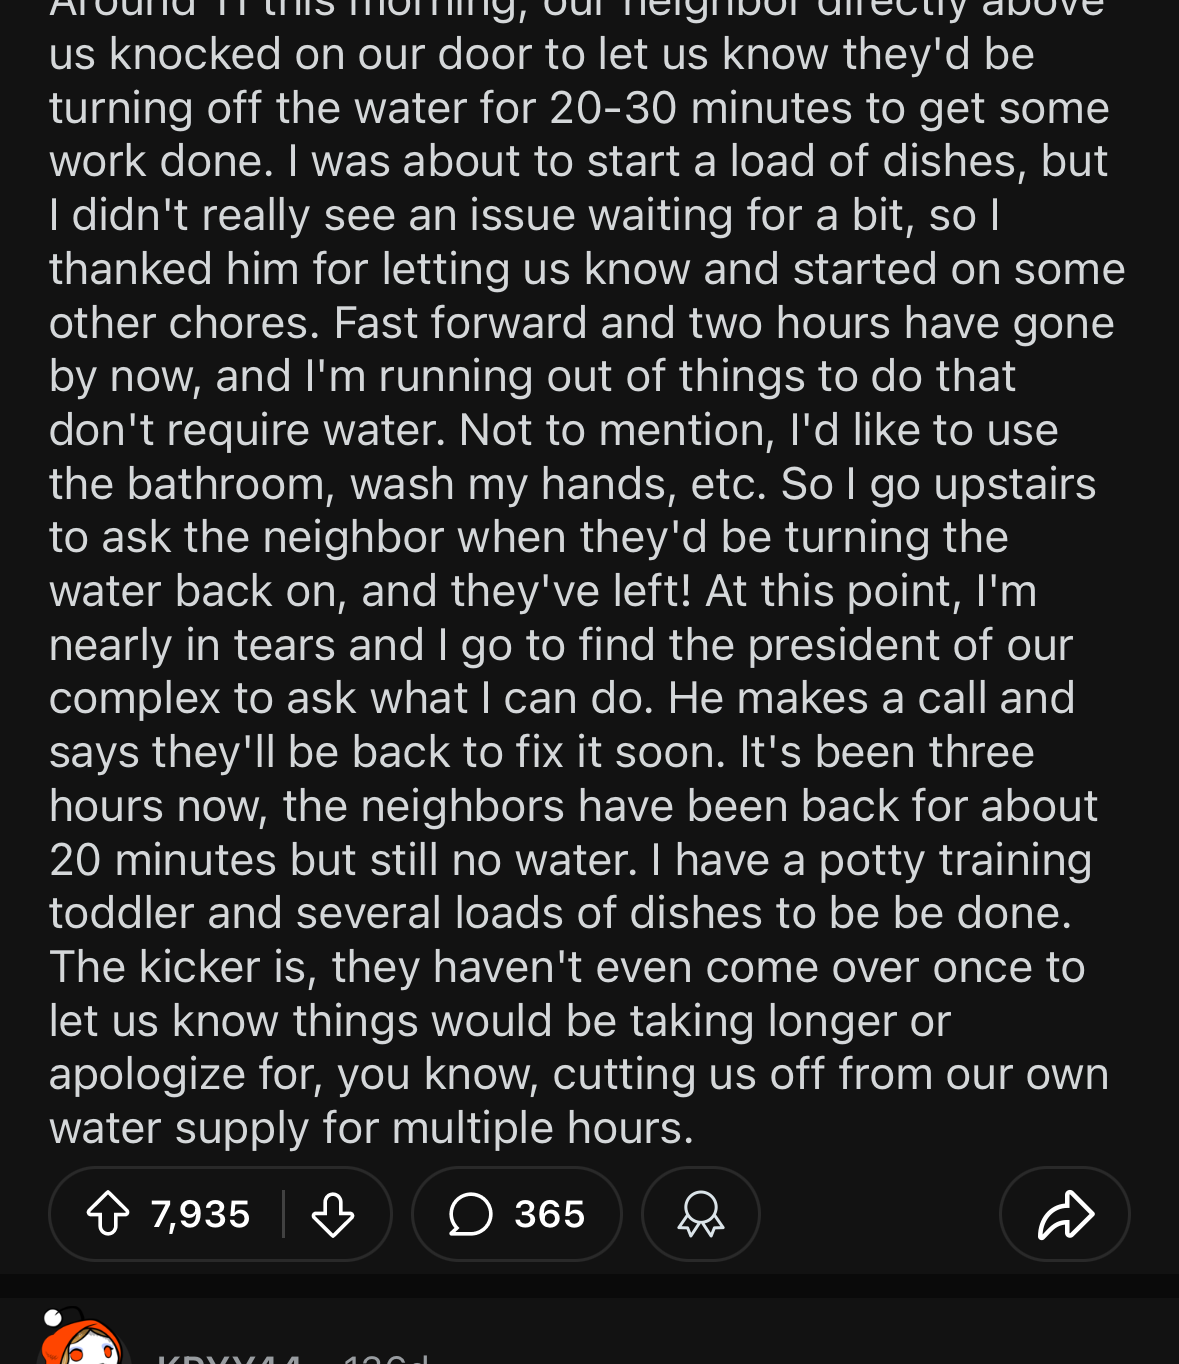 Reddit post by emma_the_alien mentioning their neighbor turning off the water supply for 20-30 minutes. Comment by KPY44: &quot;You always have to make it look like you are doing a plumbing project.&quot;